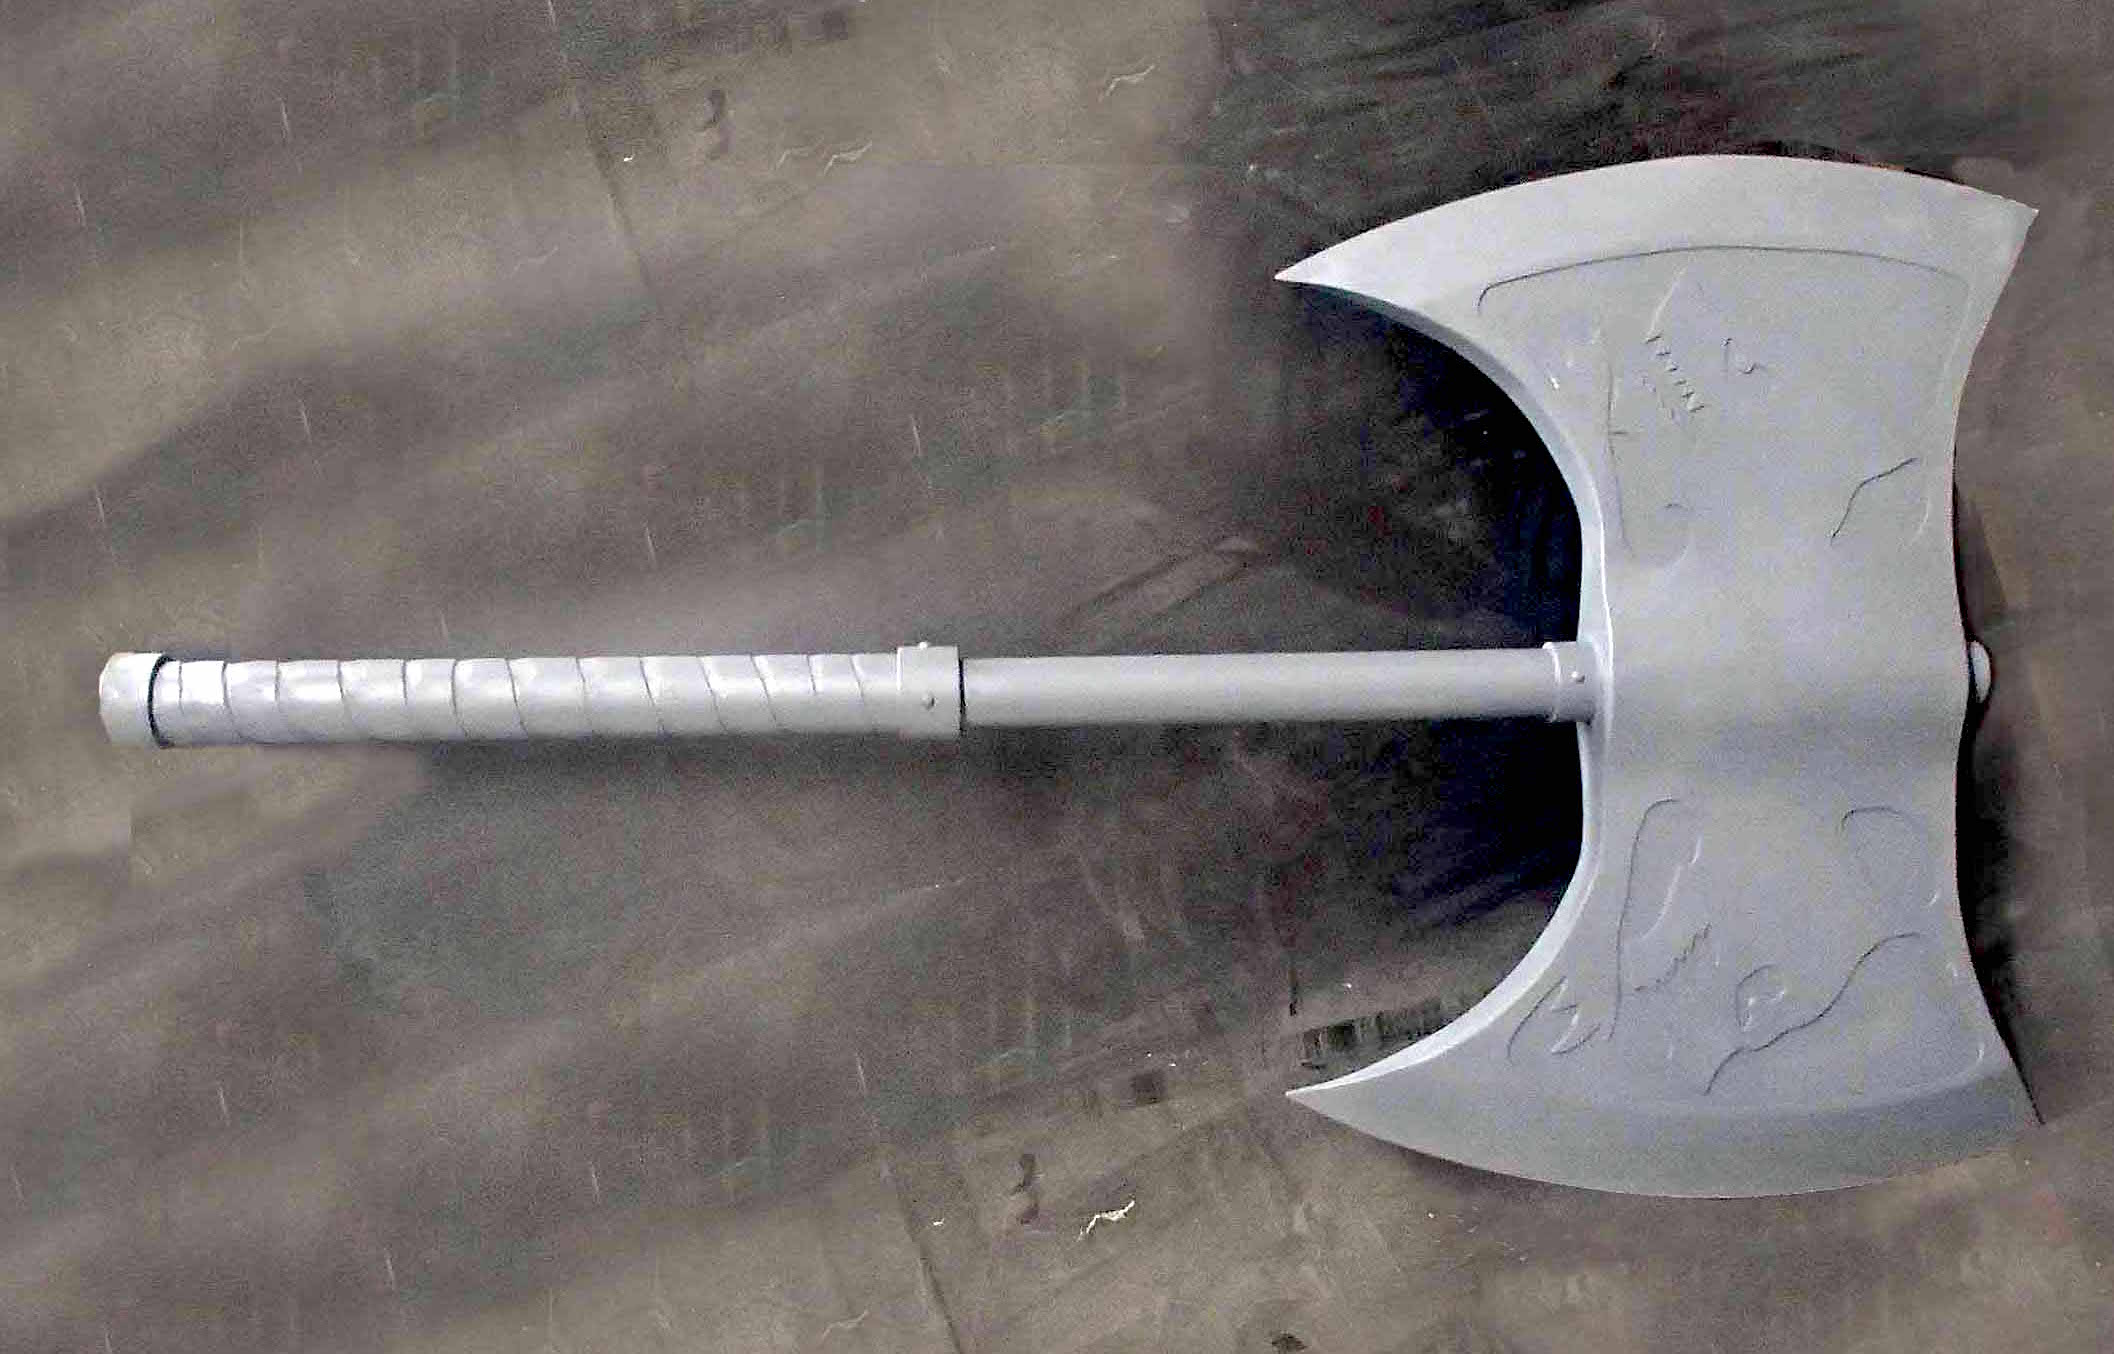 Construct a Fearsome Battle Axe Prop from MDF and PVC